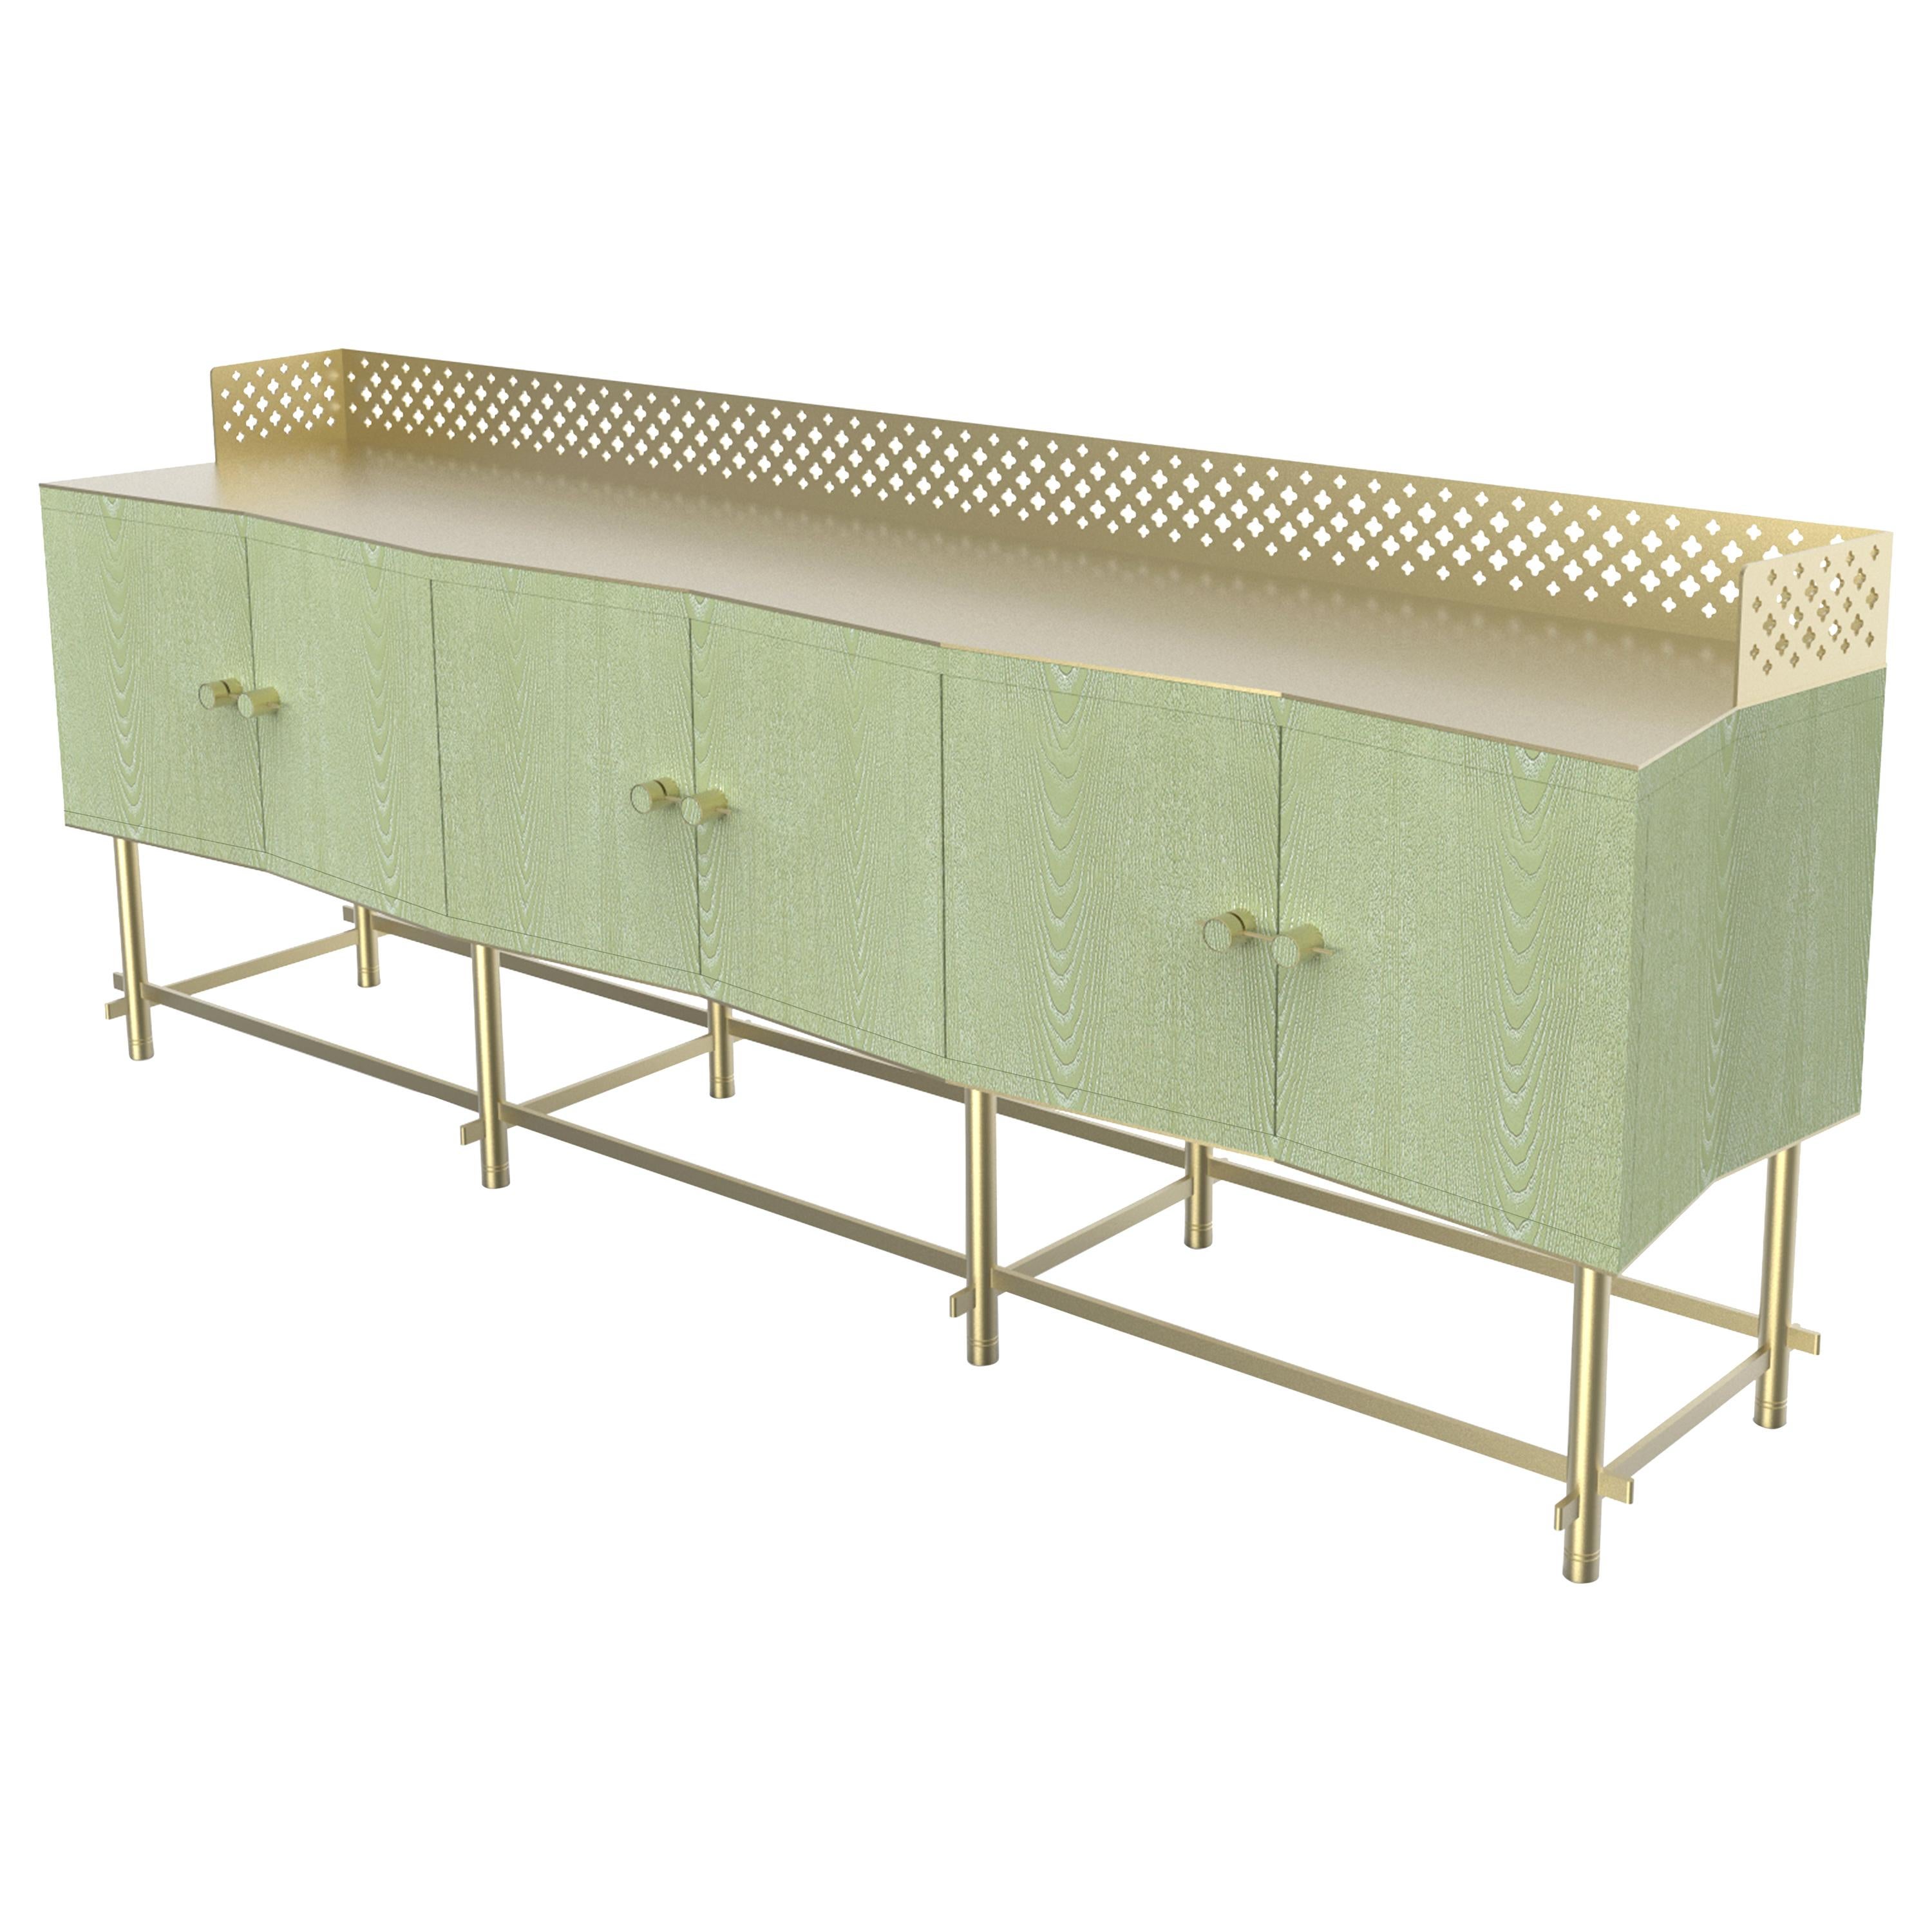 Shanti II Luxury Cabinet in Fabric Effect Wood, Jewel Handels, Made in Italy For Sale